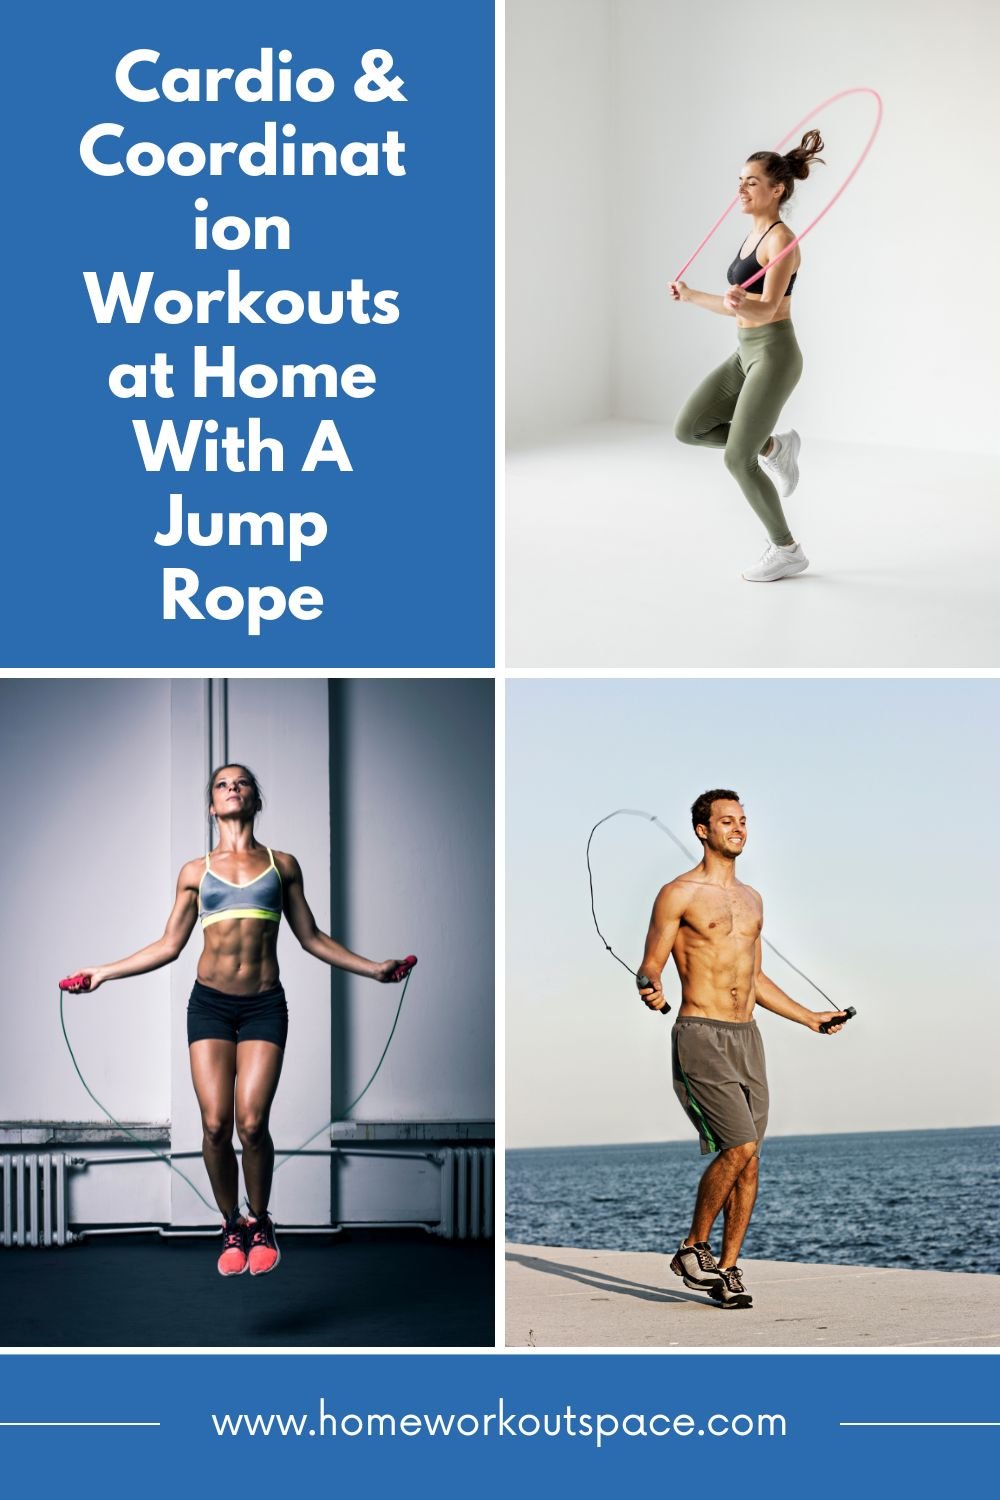 Cardio and Coordination Workouts at Home With A Jump Rope